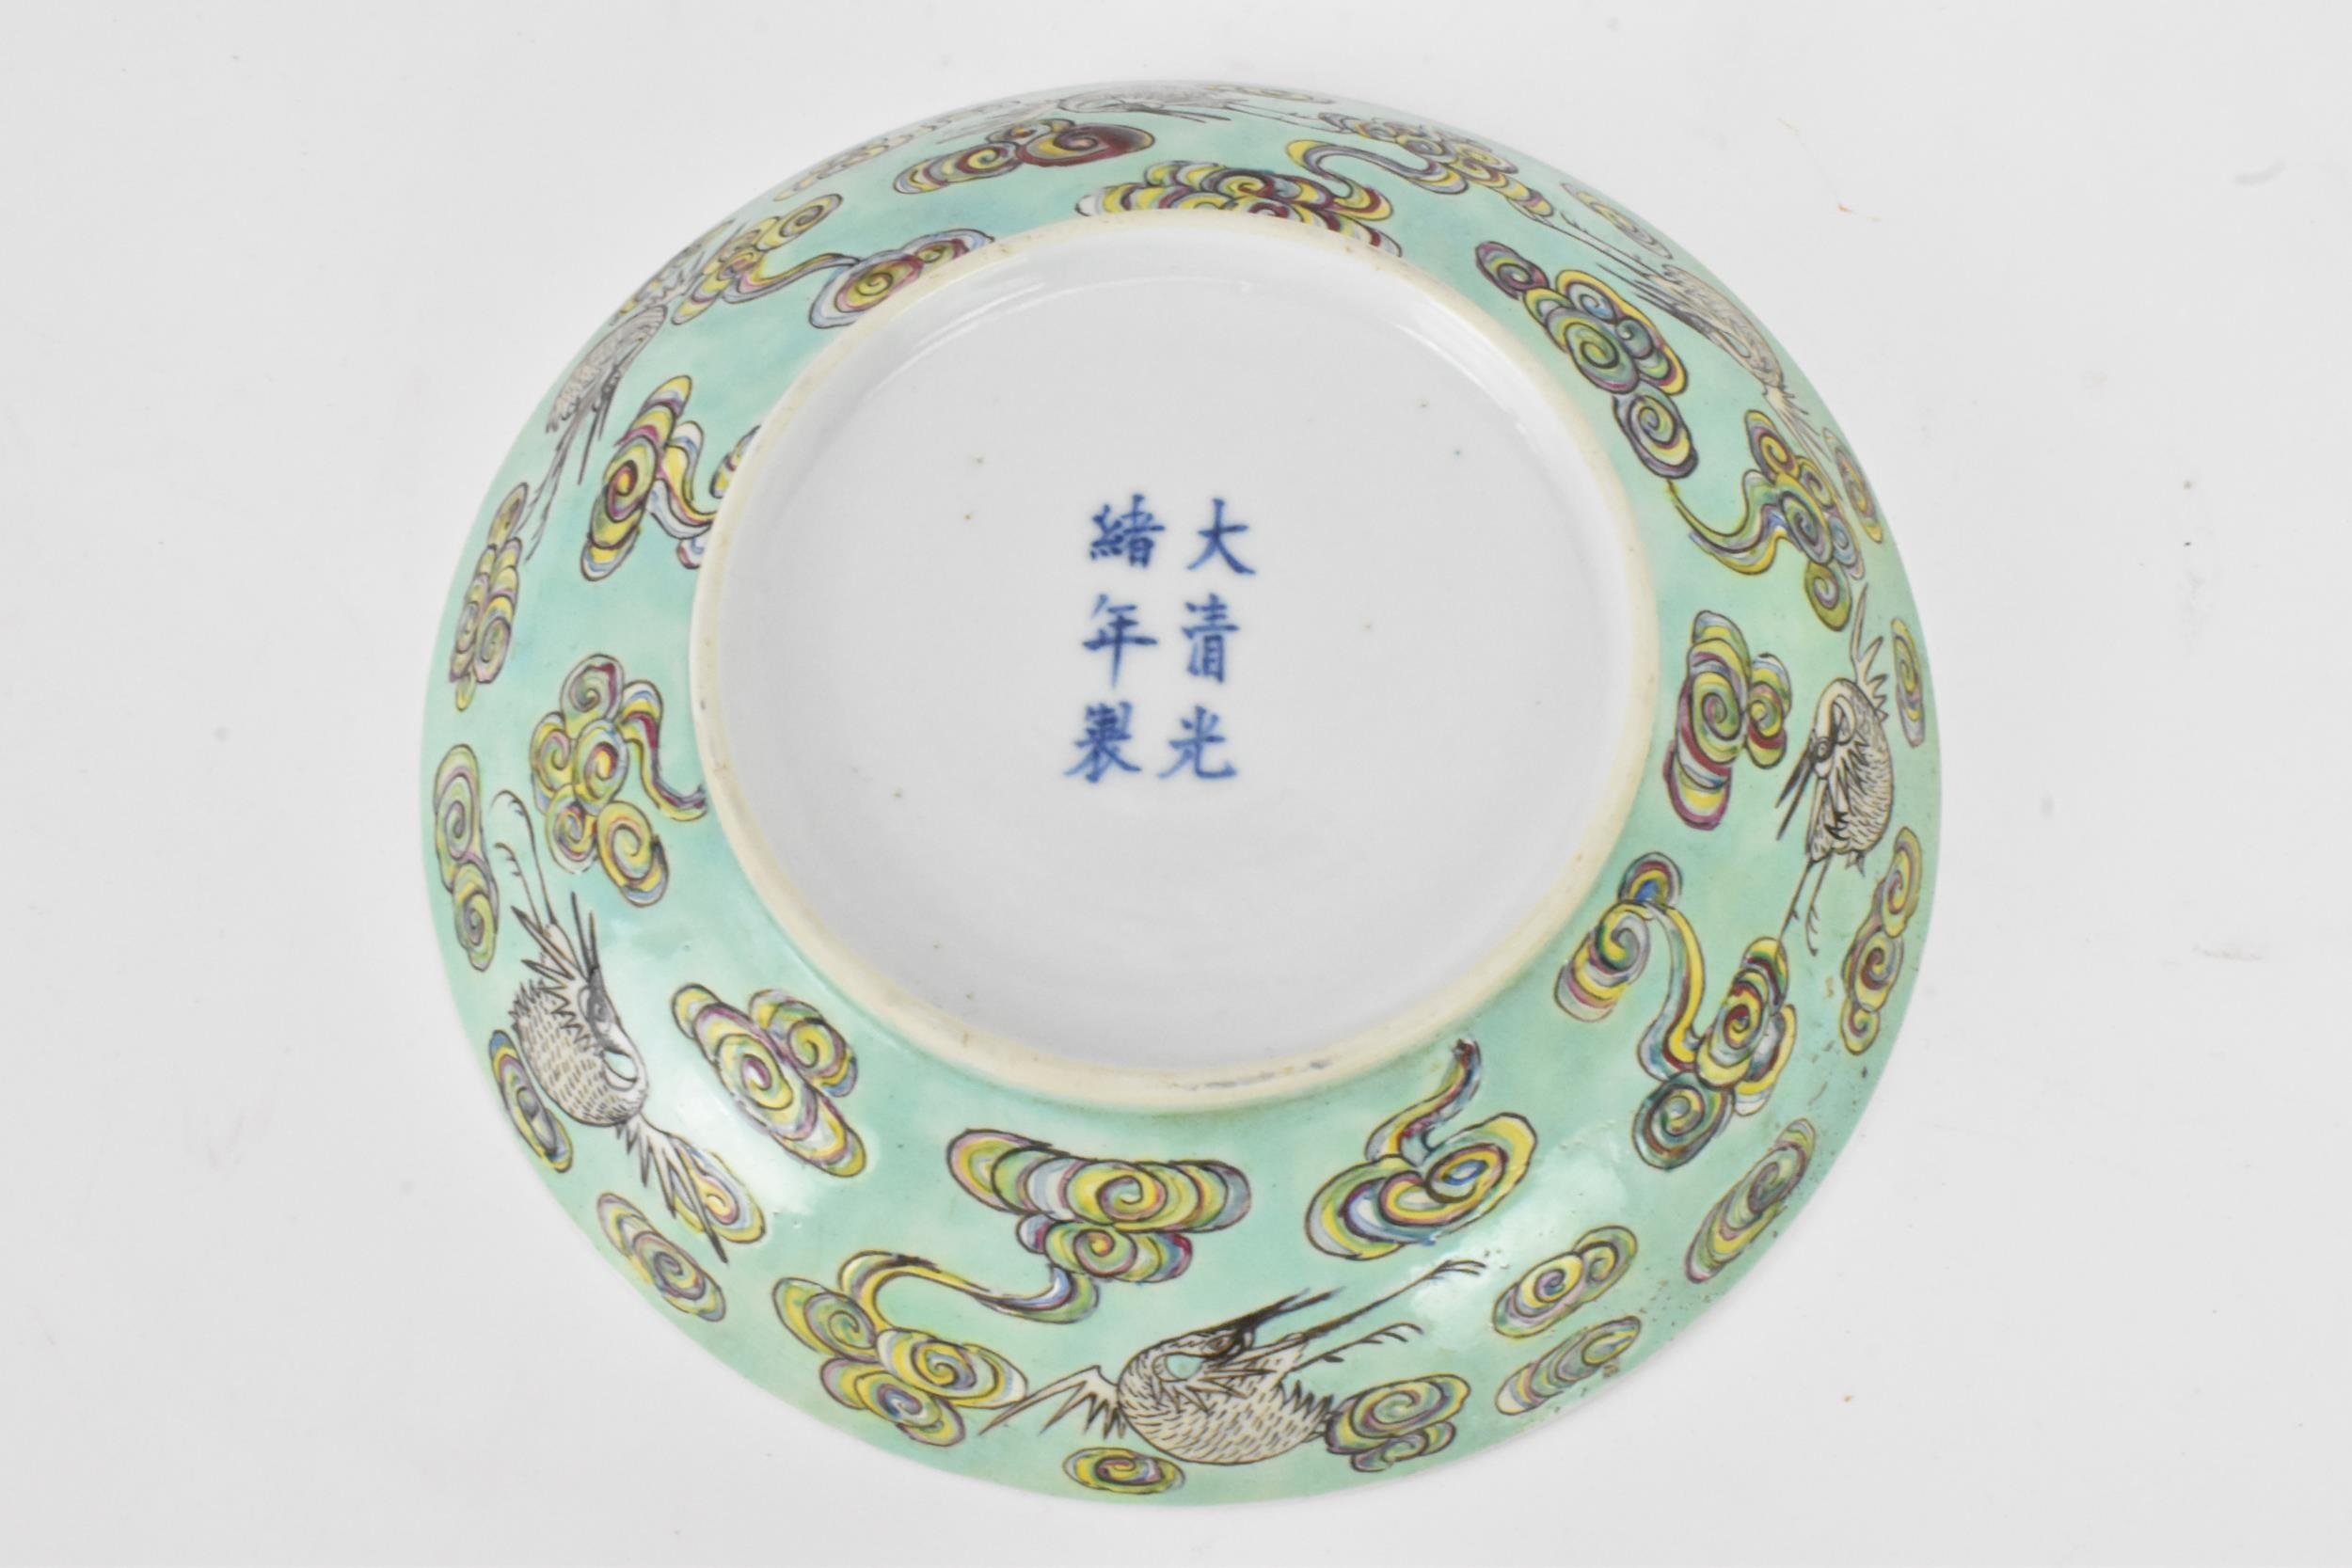 A set of three Chinese Qing dynasty, Guangxu period, famille rose bowls, decorated in polychrome - Image 5 of 7